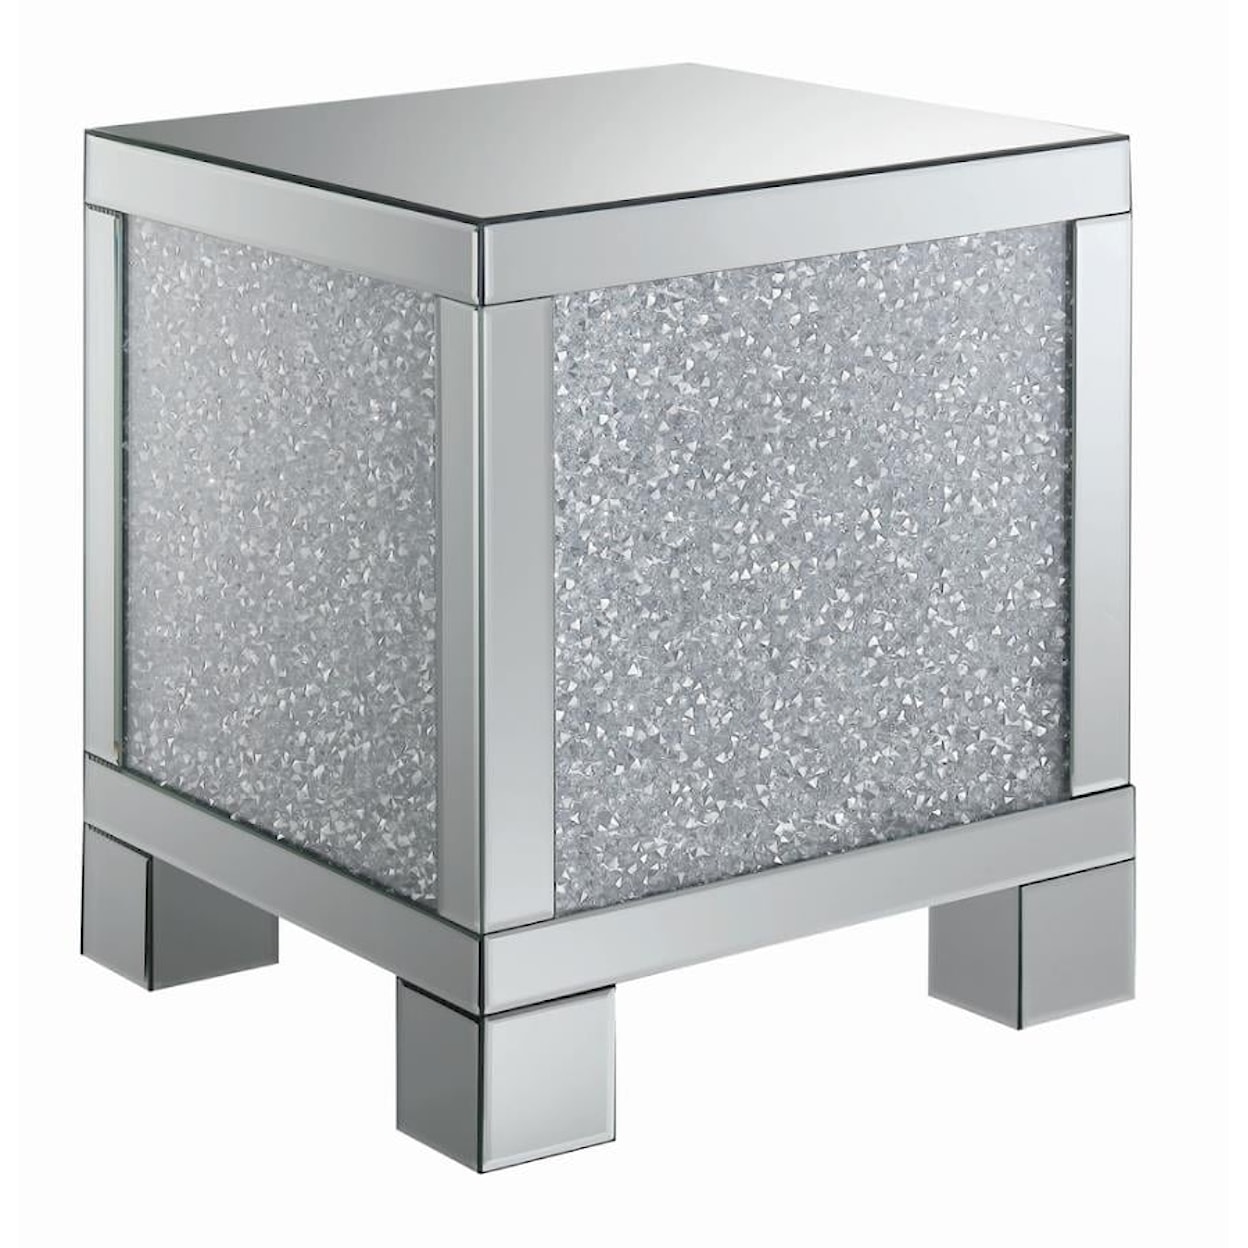 Coaster Glam BLING END TABLE. |